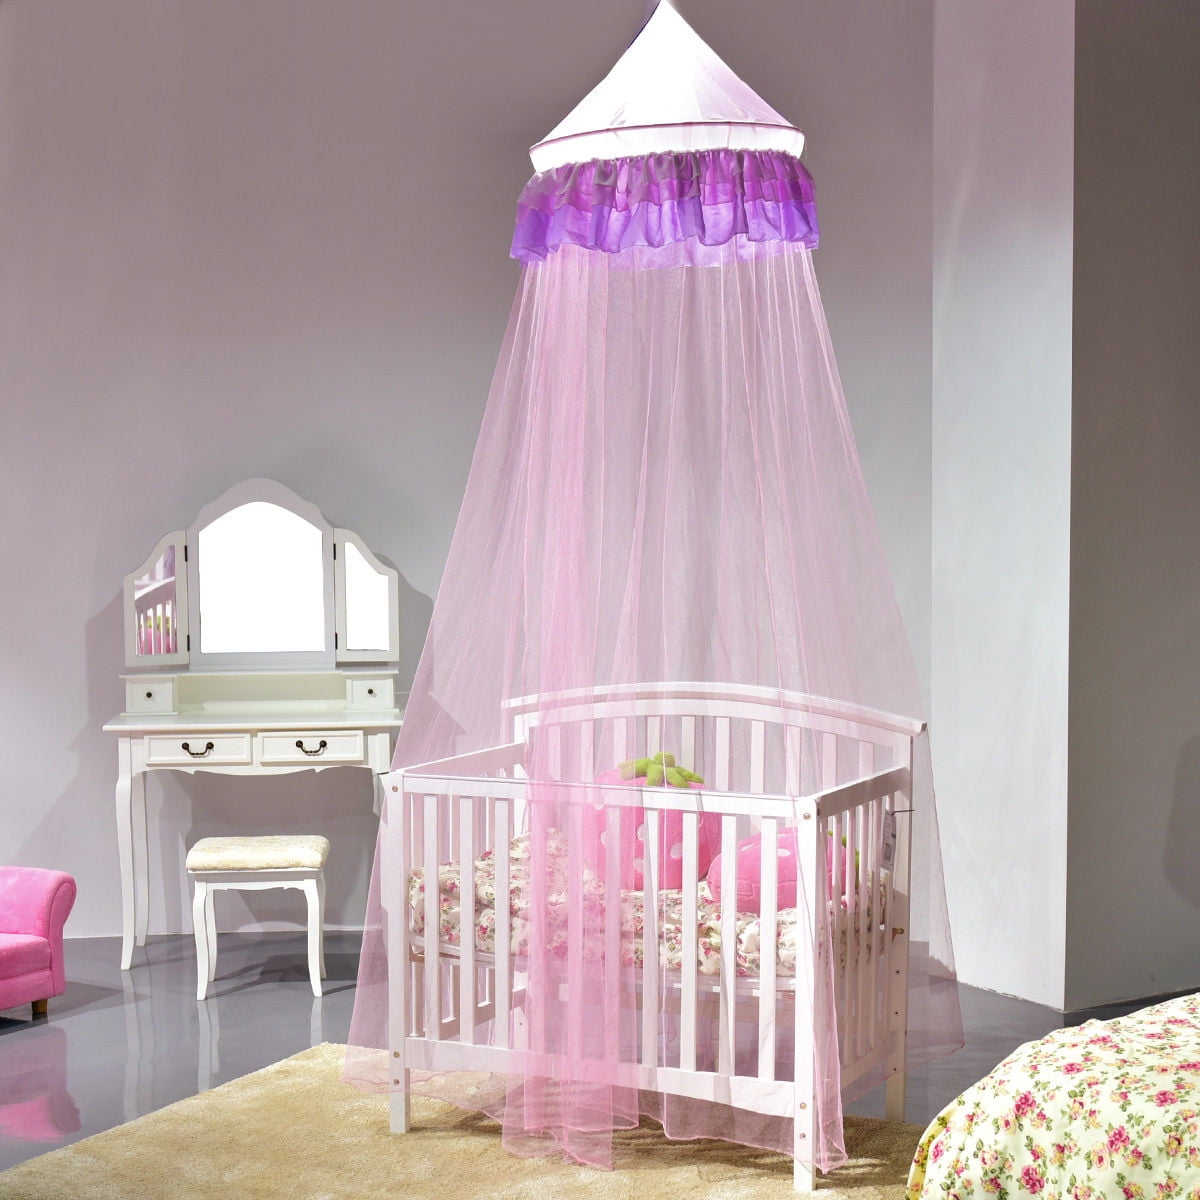 Mosquito Net Bed Home Bedding Lace Canopy Elegant Round Netting Princess Folding 